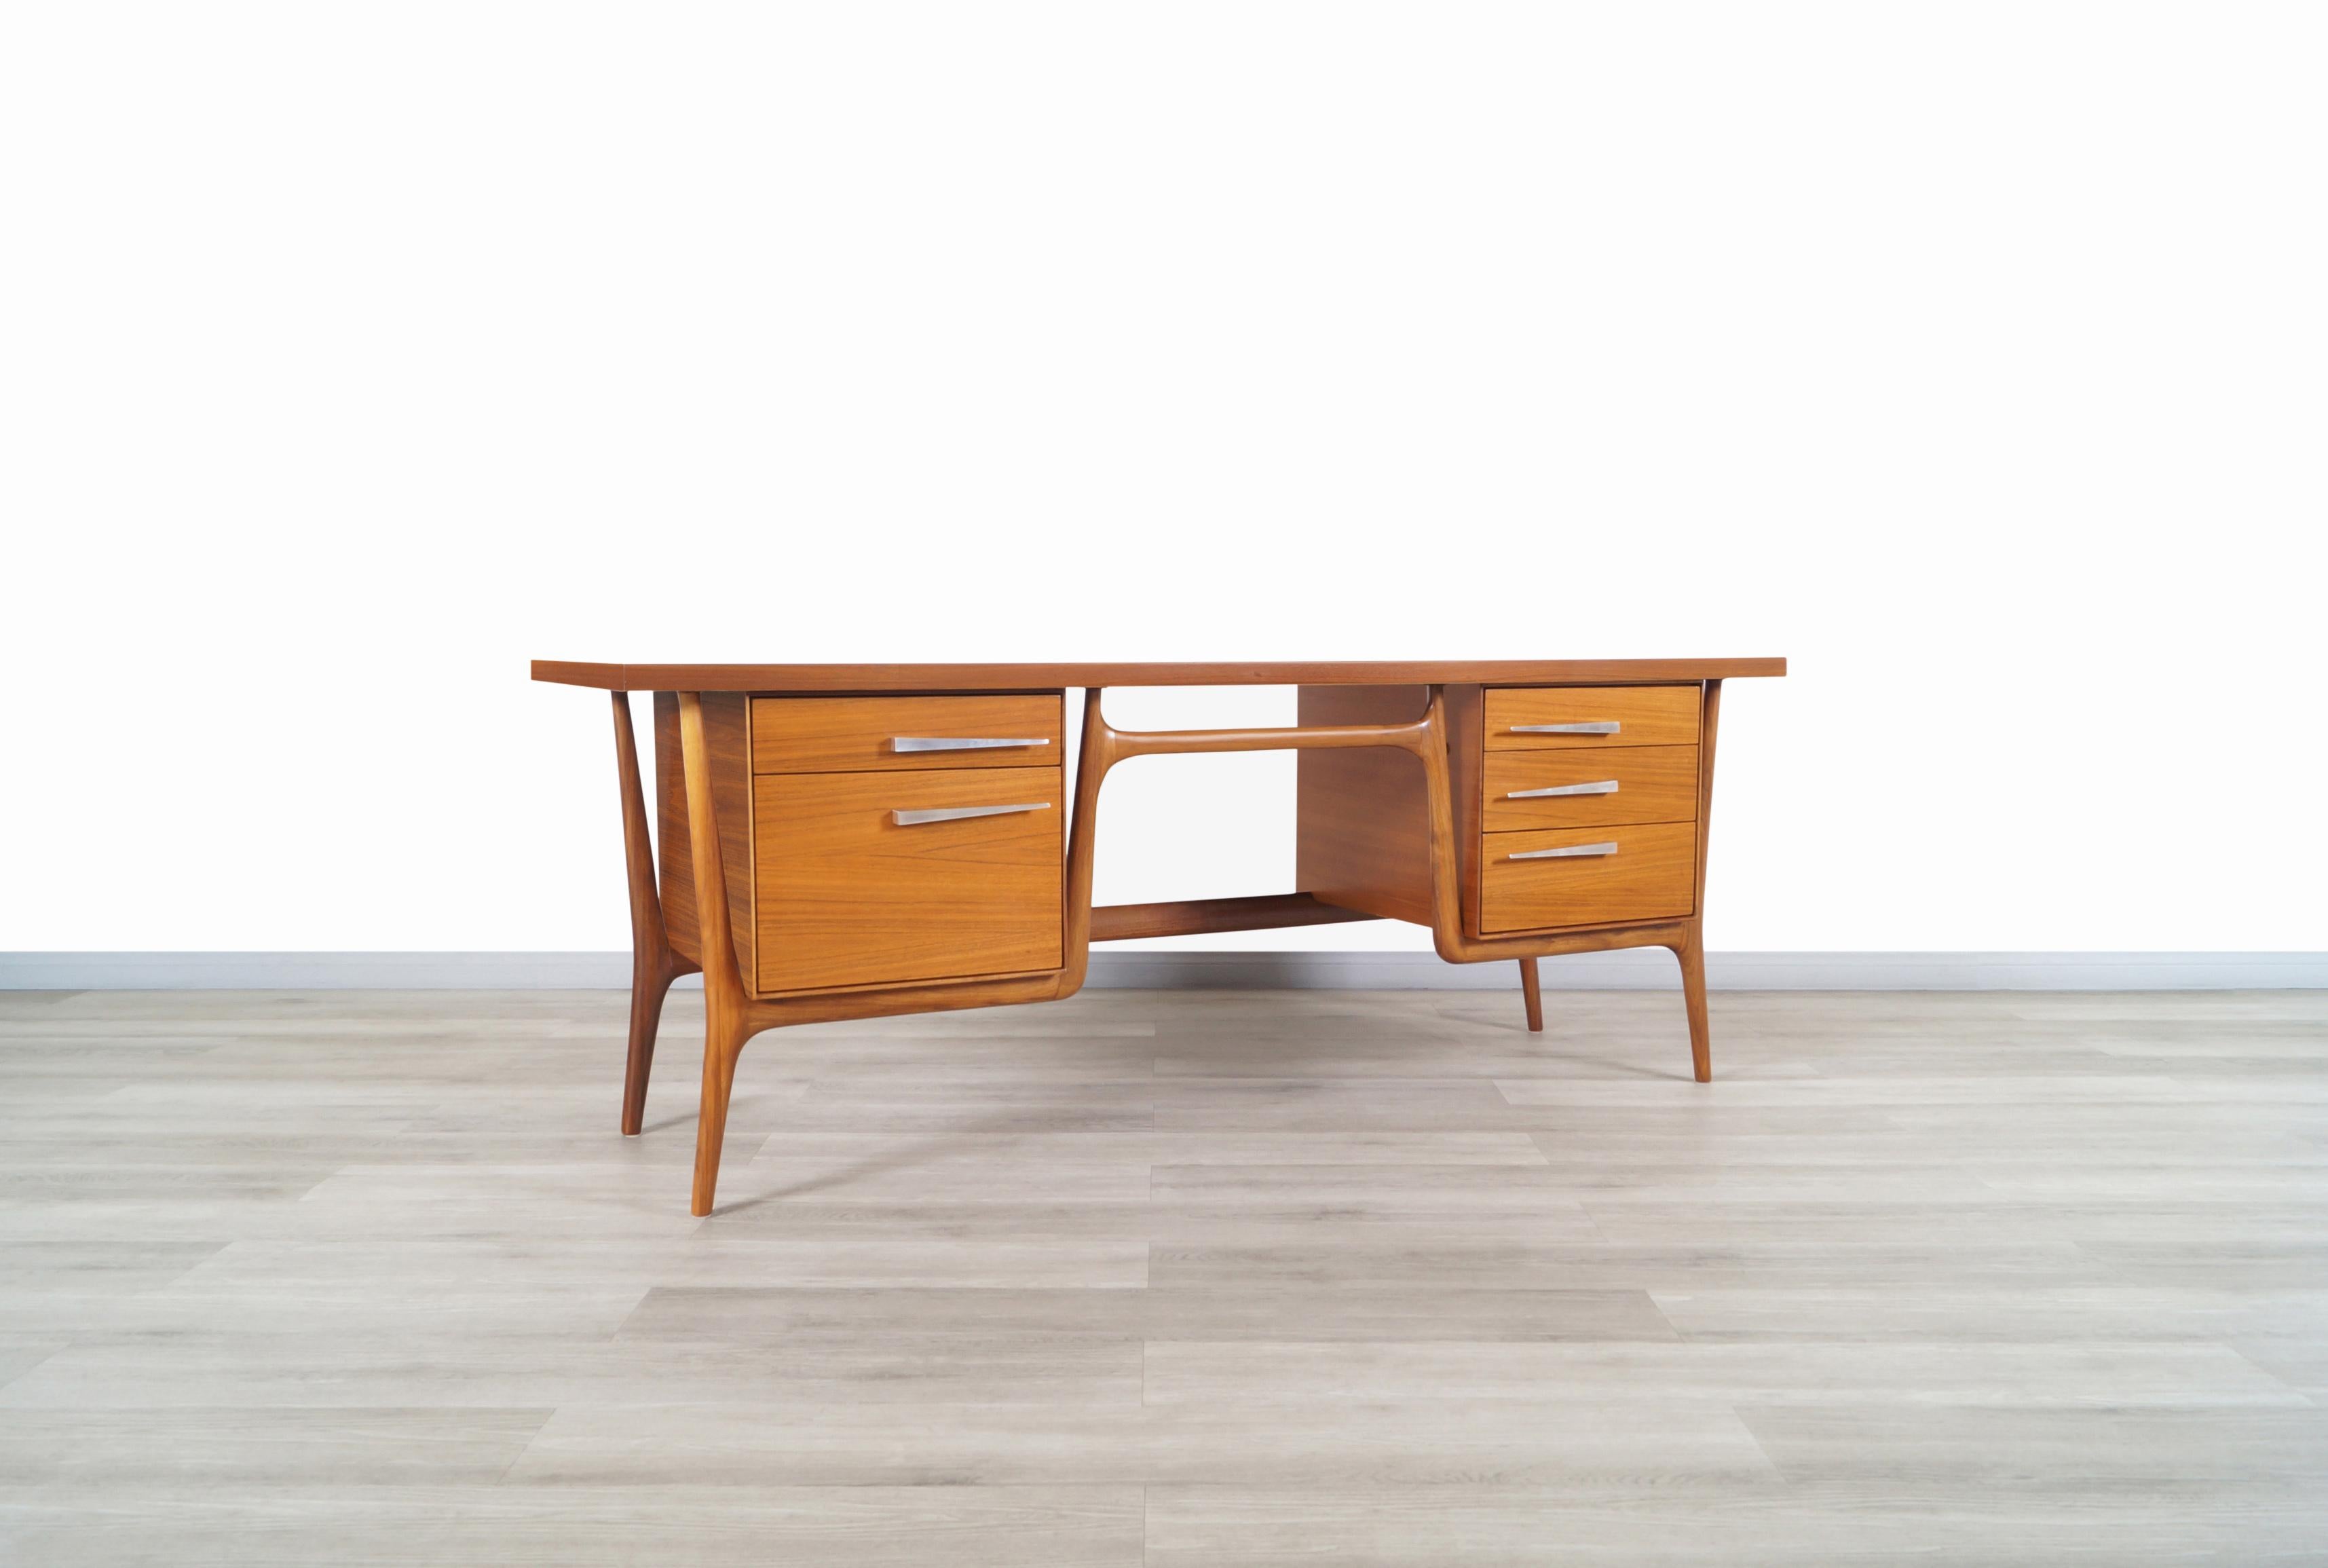 Amazing vintage sculptural walnut desk designed and manufactured by Leopold Co. of Burlington in the United States, circa 1950s. This desk has an avant-garde design combined with the finest of walnut results in a distinctive piece of furniture. The